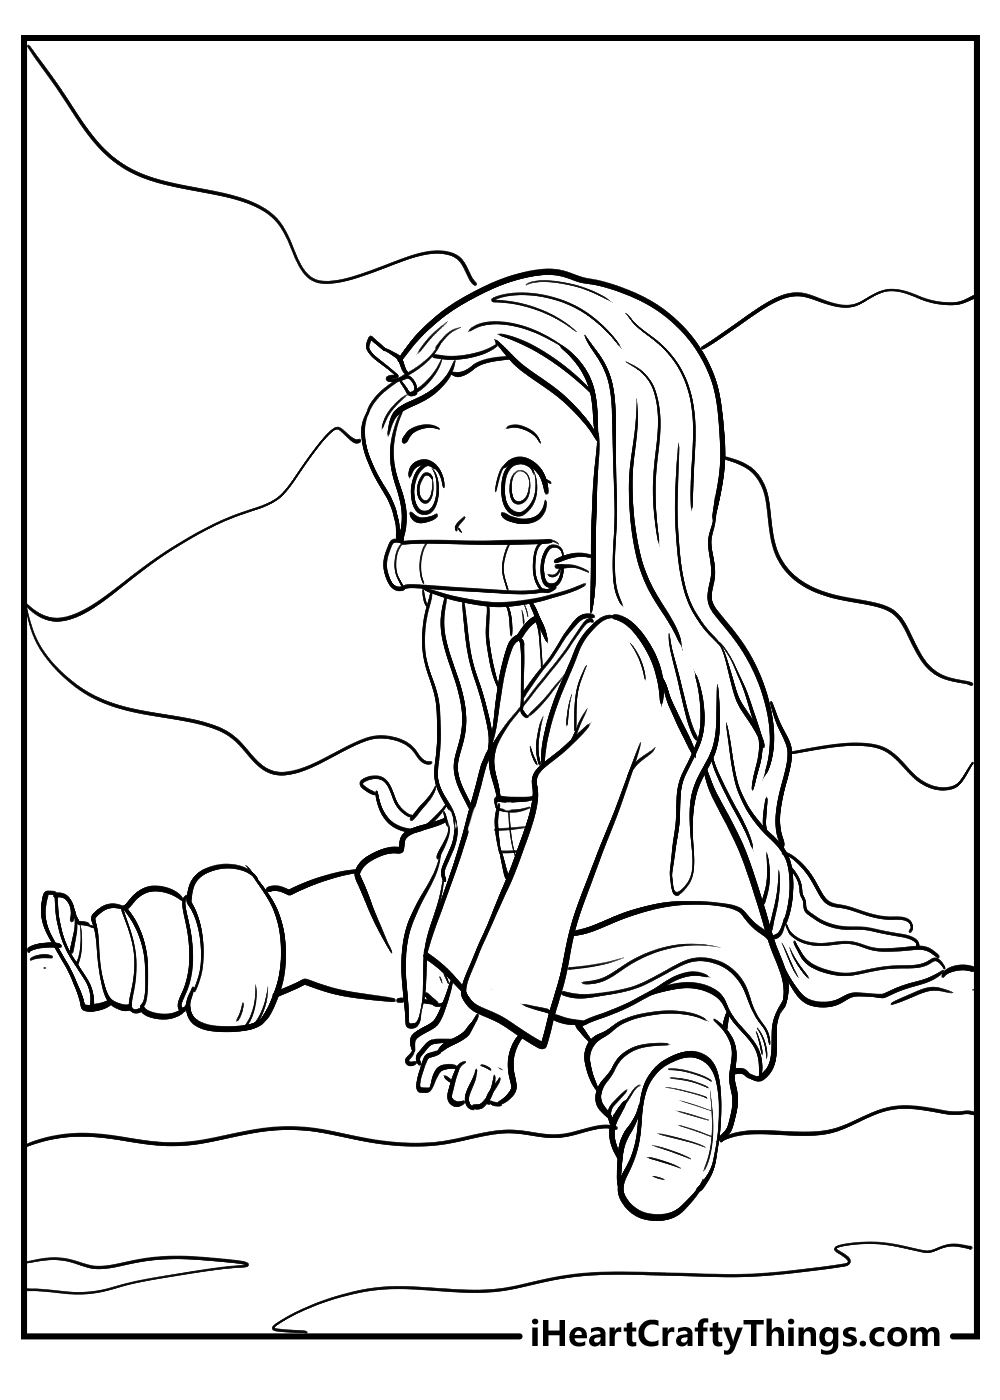 nezuko coloring pages free download